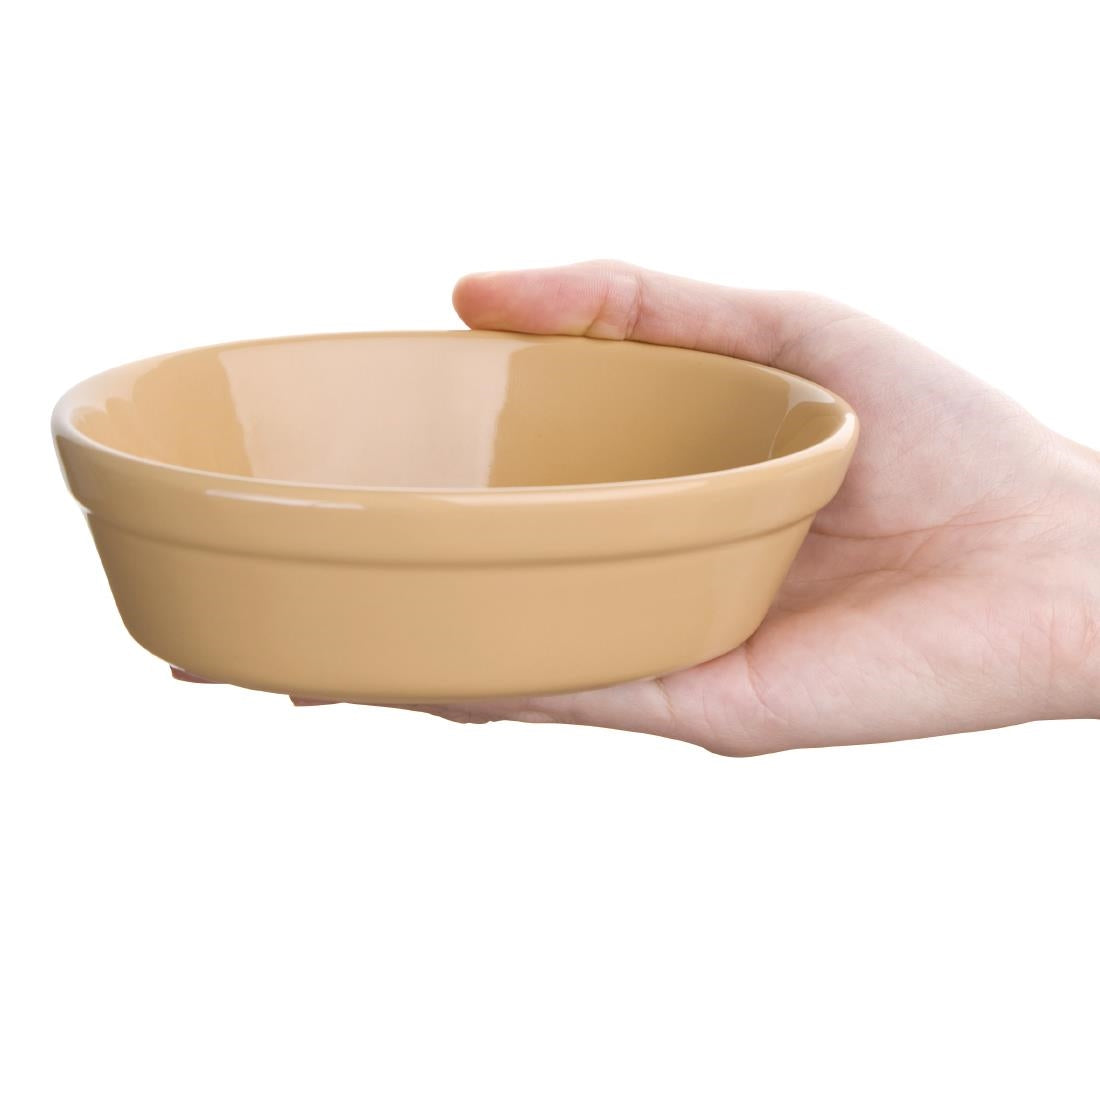 C104 Olympia Stoneware Oval Pie Bowls 145 x 104mm (Pack of 6)